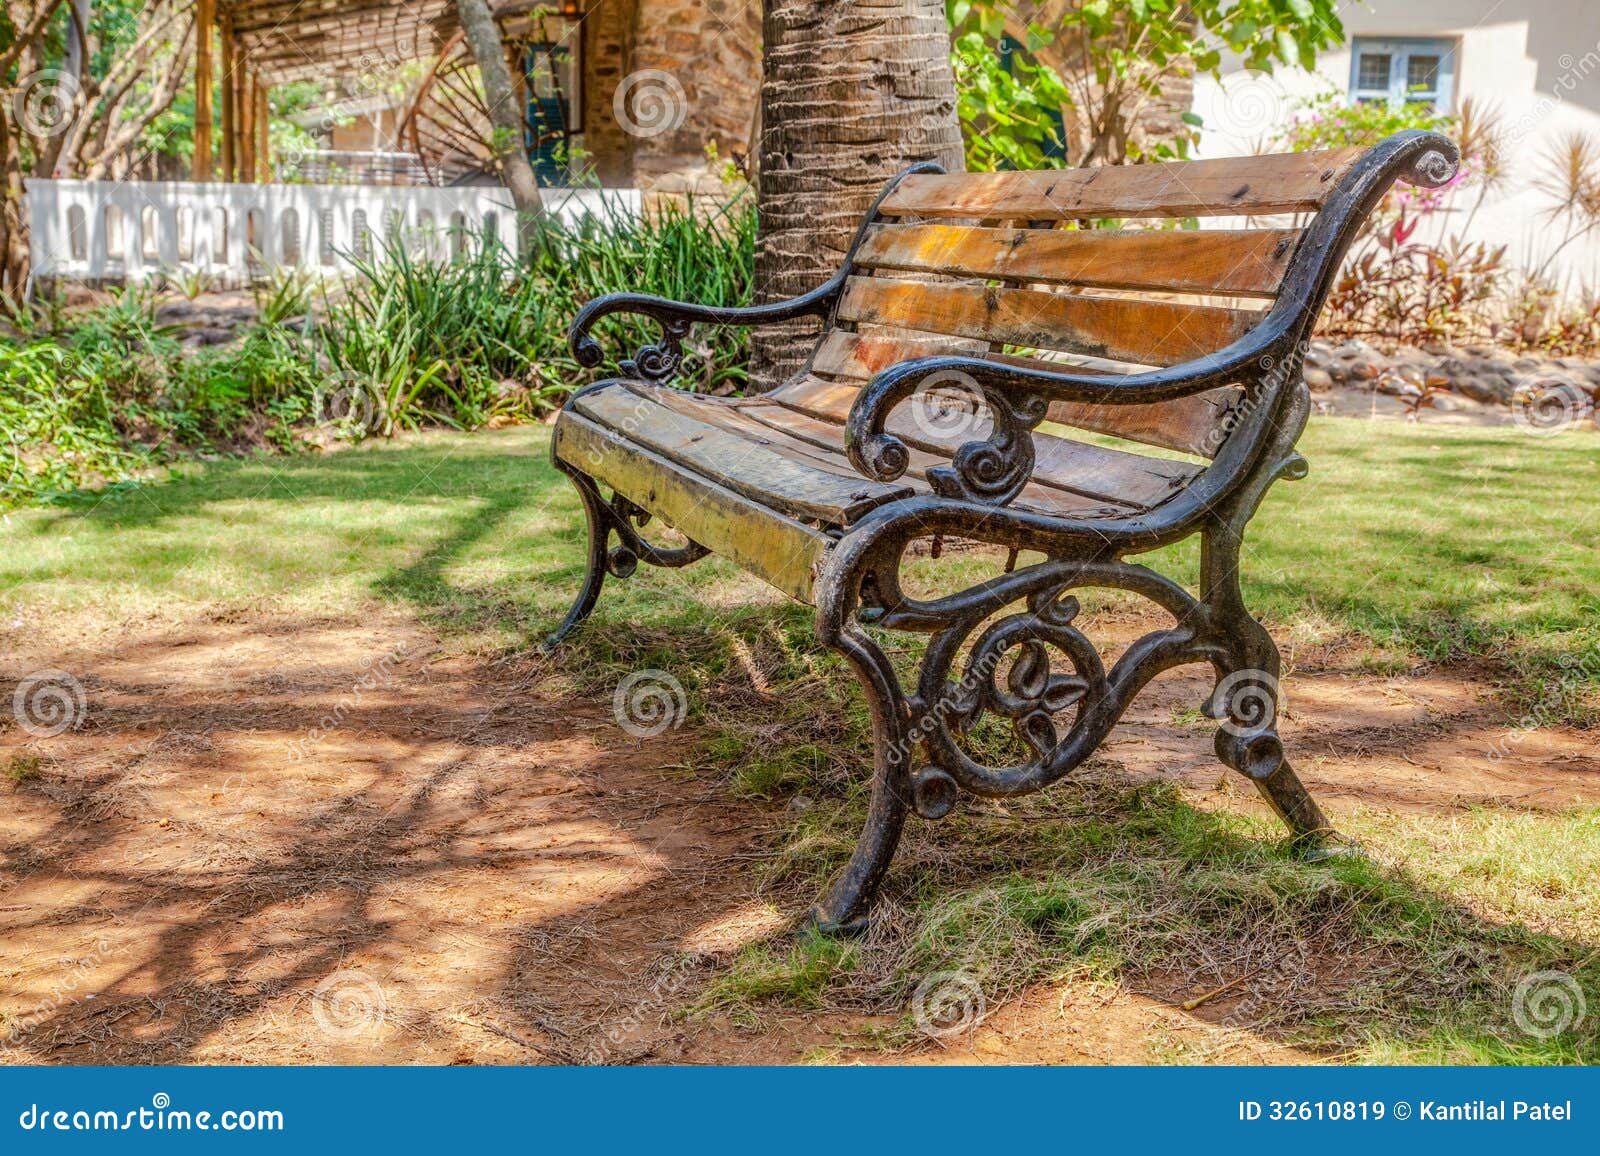 Cast Iron Wood Slatted Bench Garden Shade.CR2 Royalty Free Stock Images